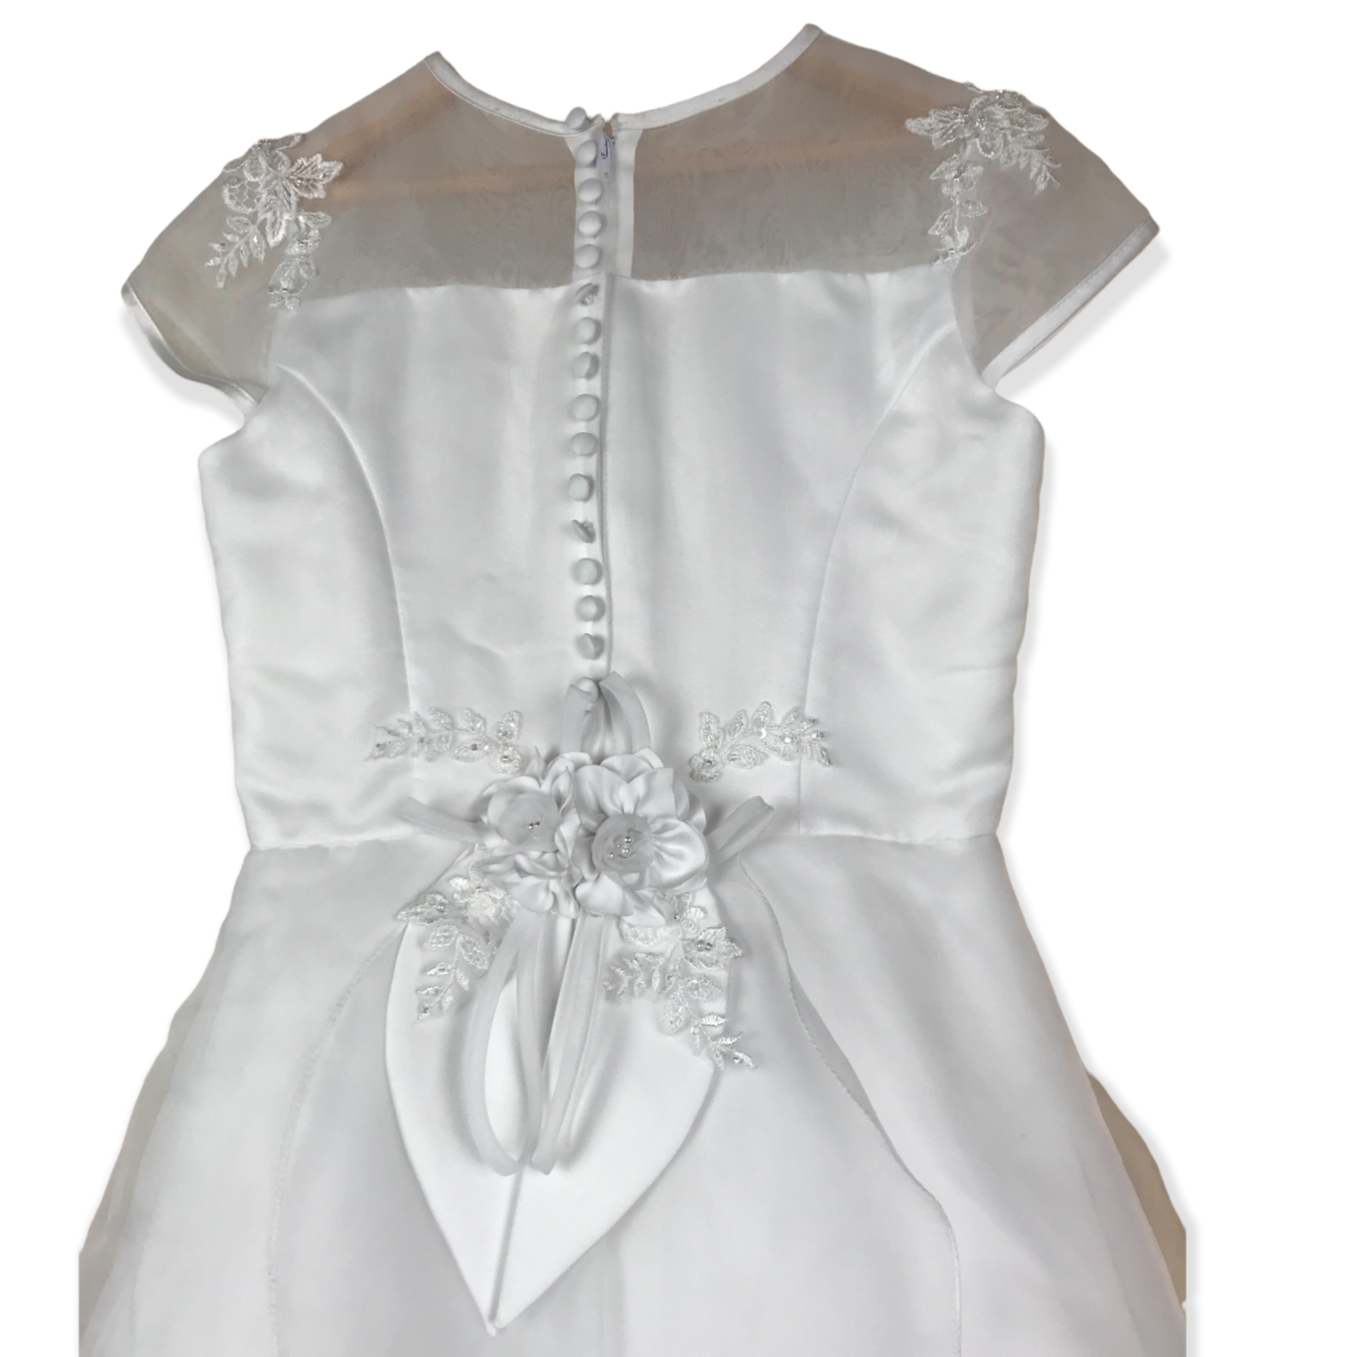 Sarah Louise White Embroidery Detailed Formal Dress Age 10